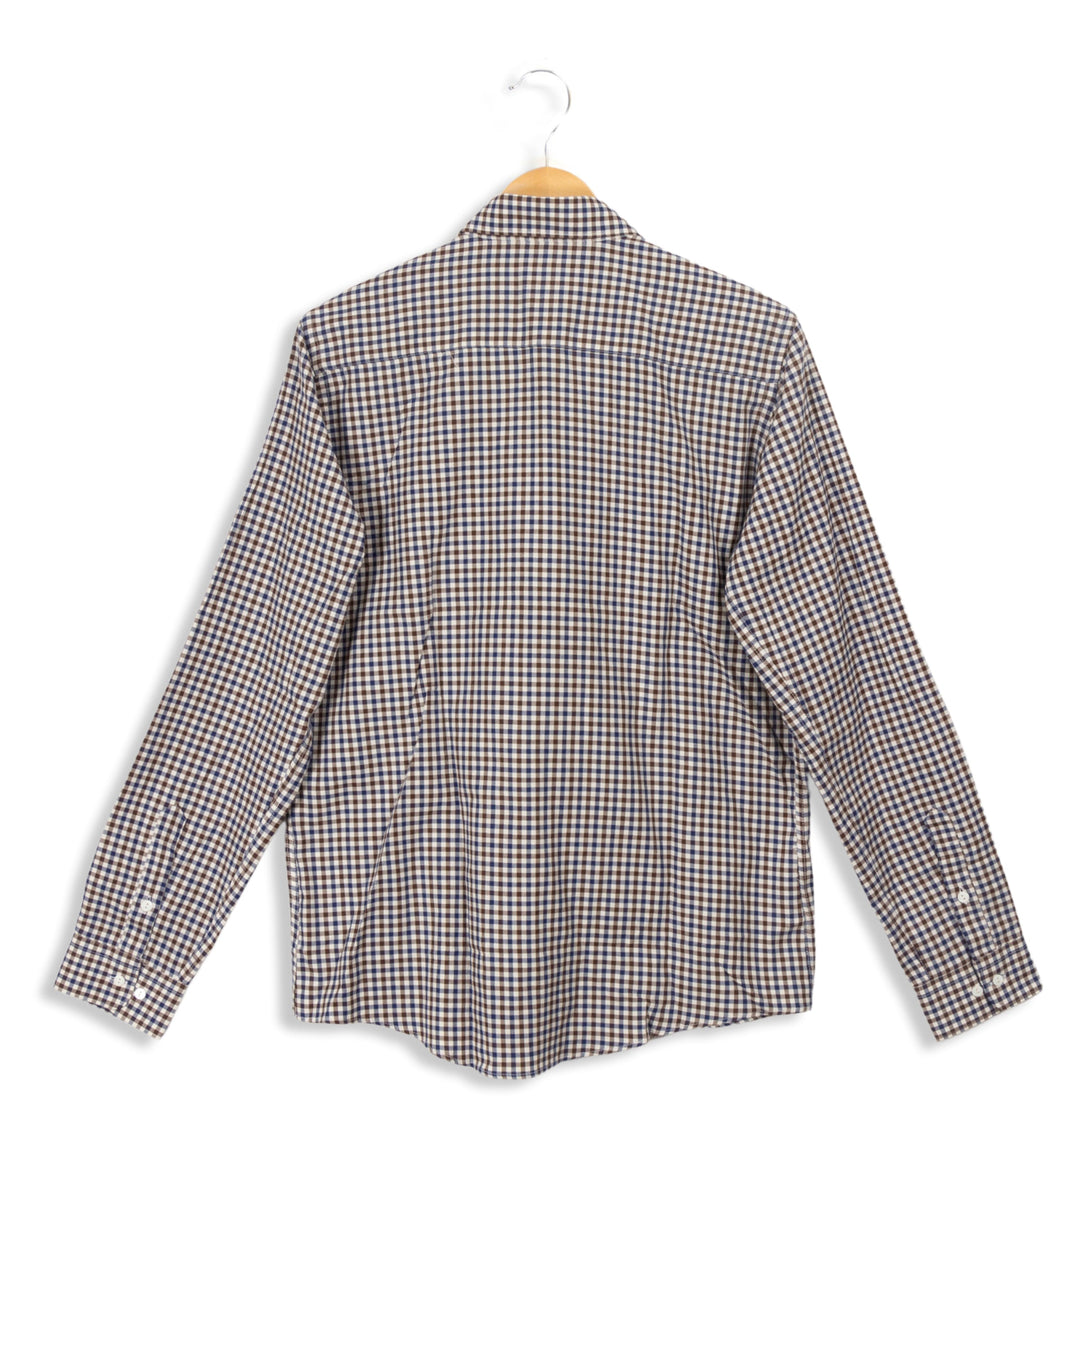 Blue and brown checked shirt - S